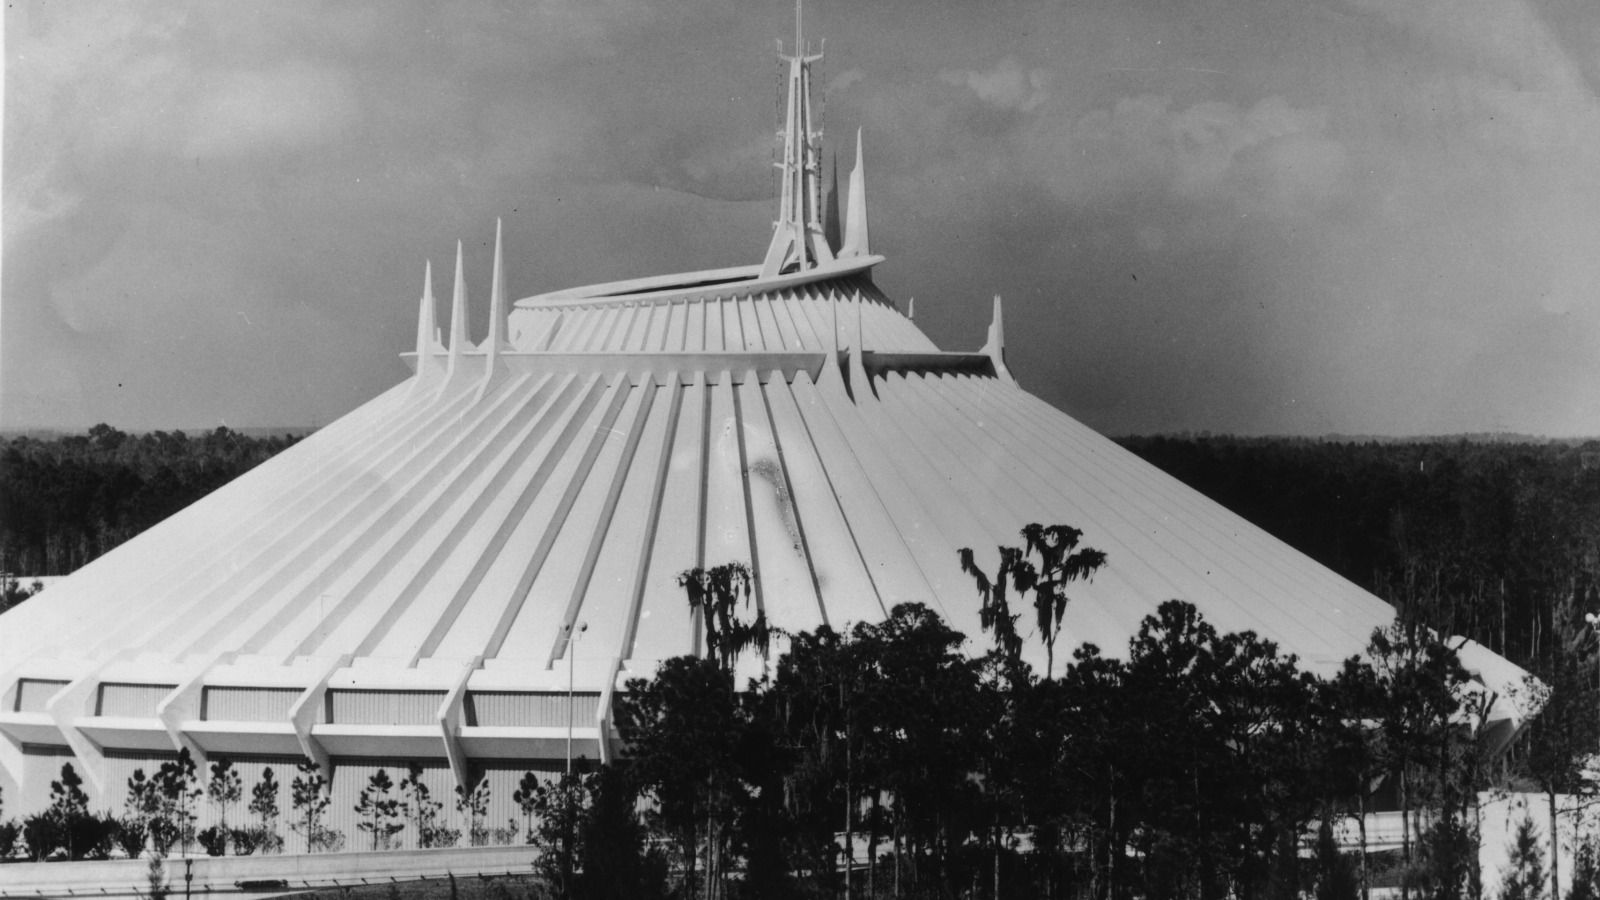 The Terrifying Part Of Space Mountain's History